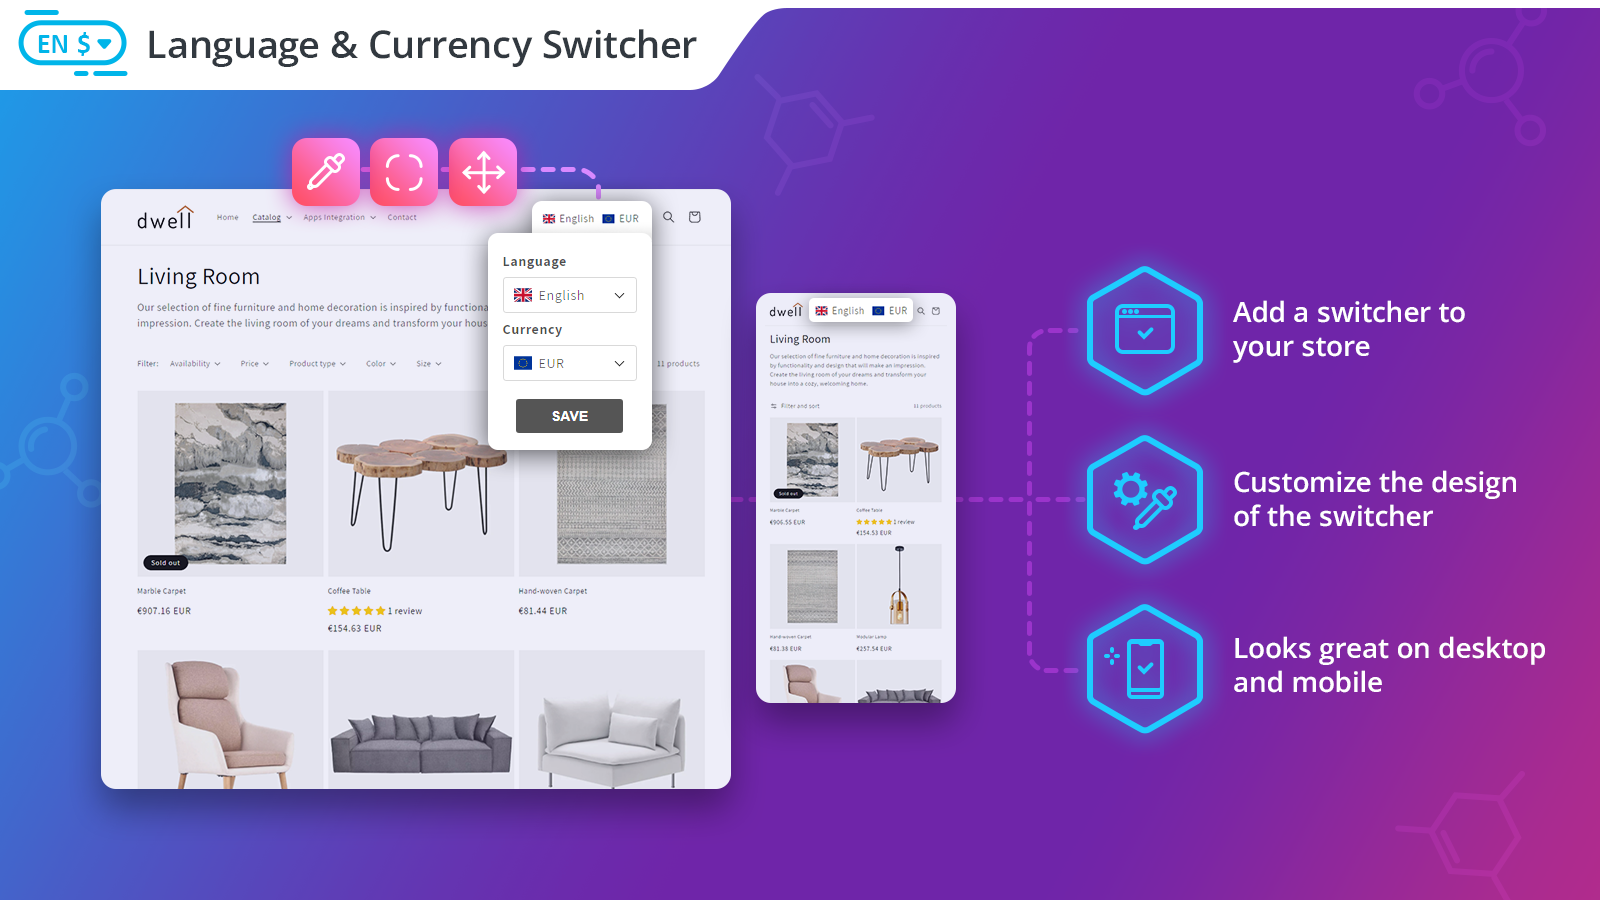 Translation Lab Language and Currency Switcher